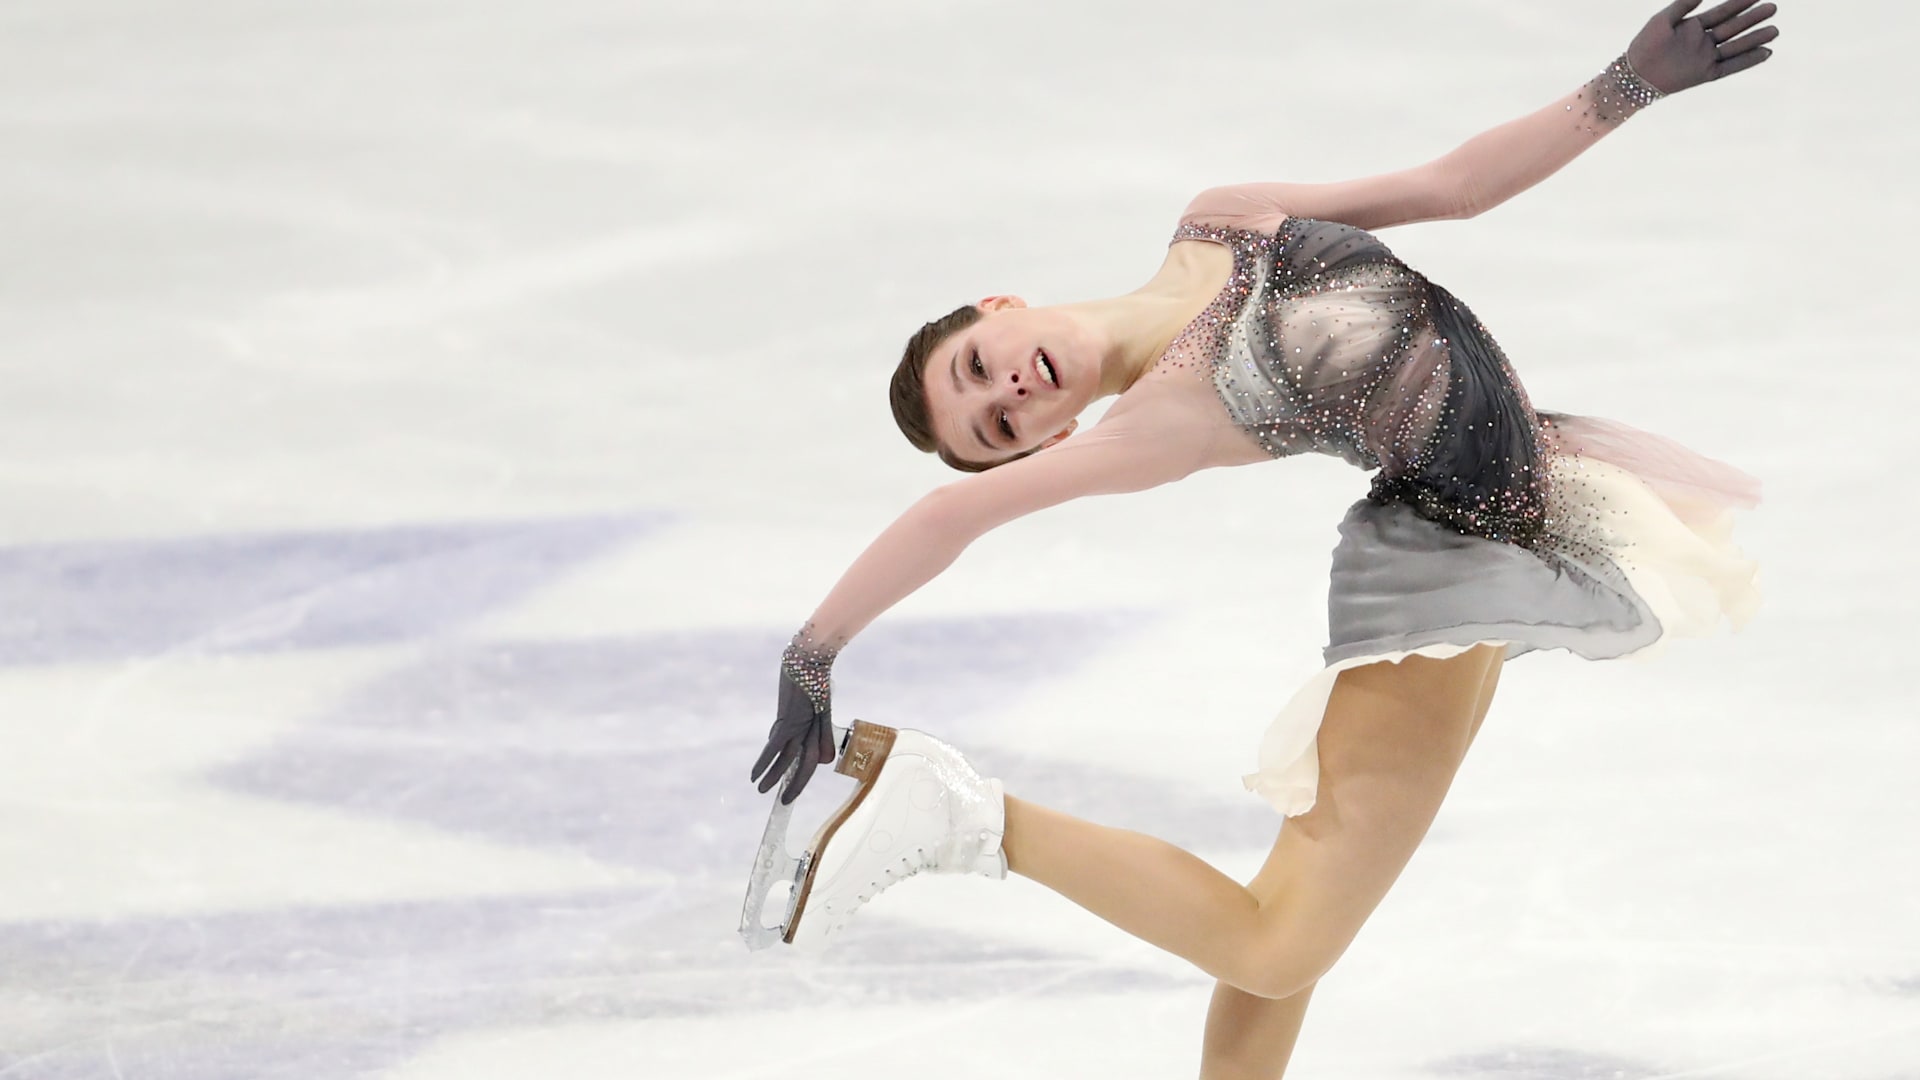 Team energy inspires Canadian figure skaters as they look ahead to  individual Olympic events - Team Canada - Official Olympic Team Website